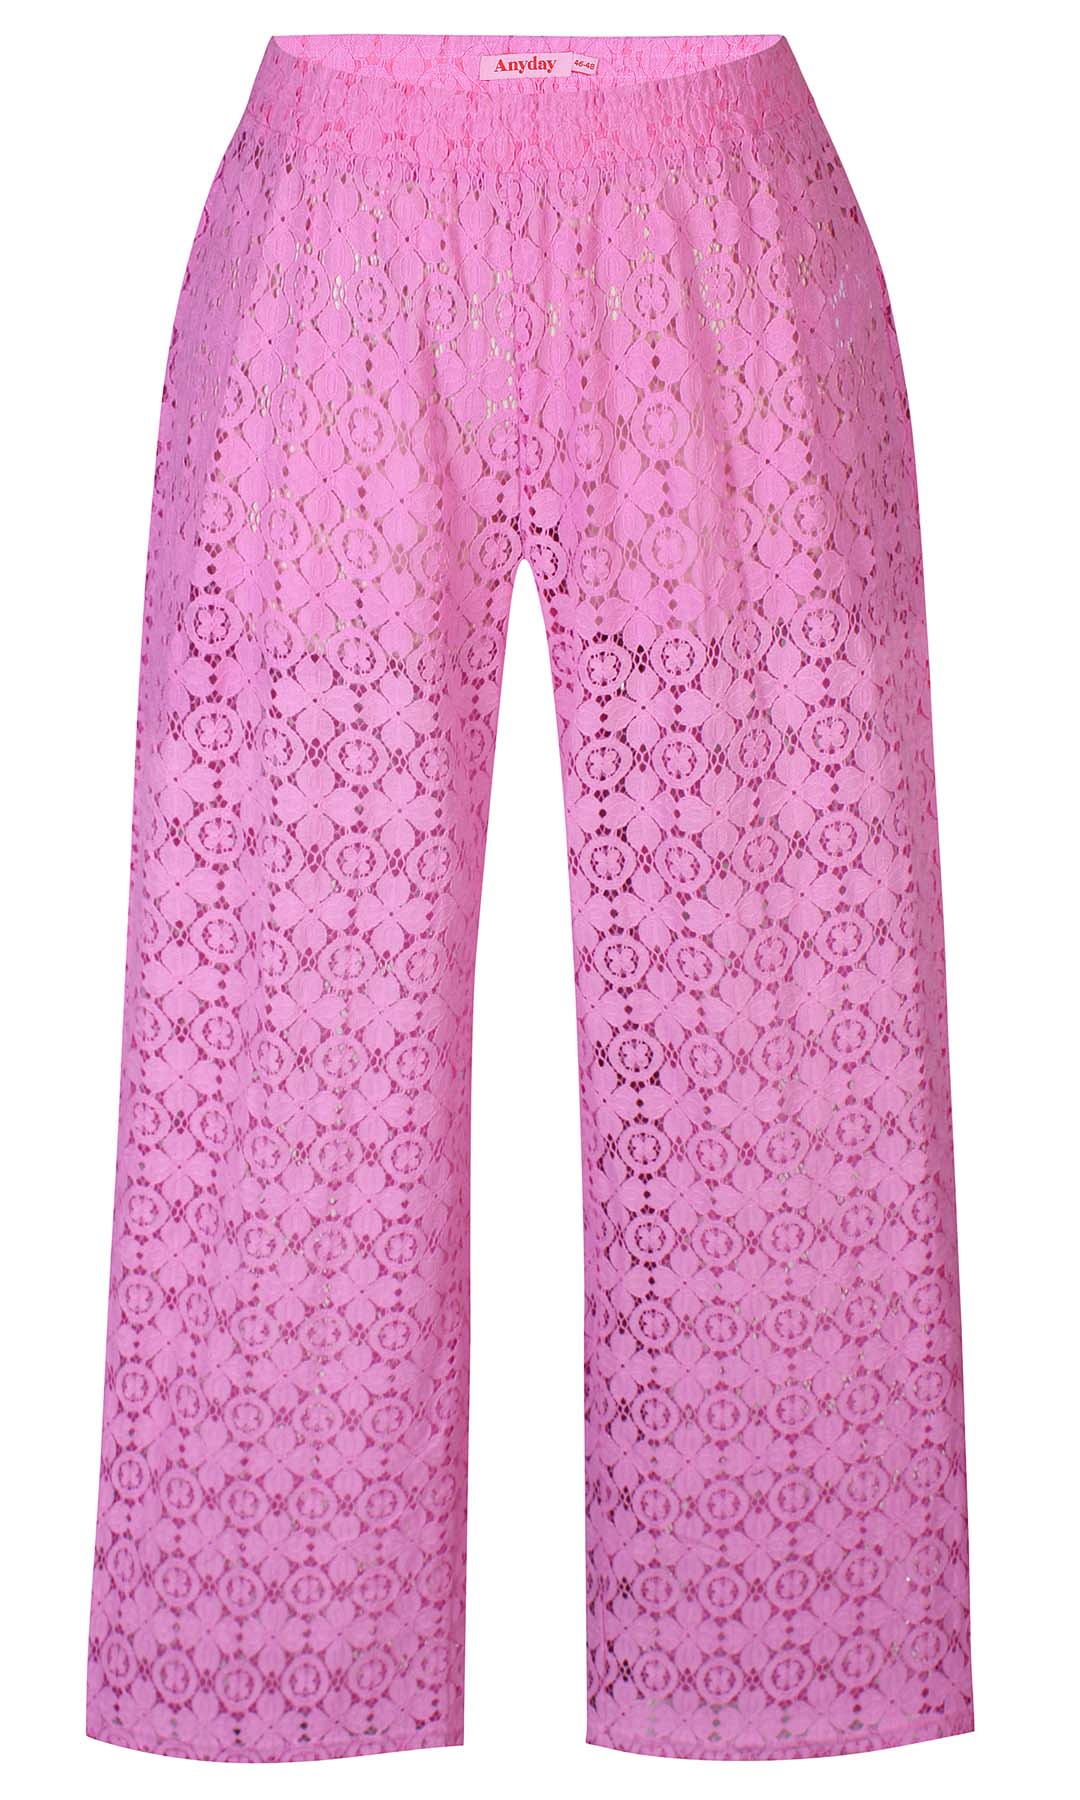 Tuesday 167 - Lace Pants - Pink